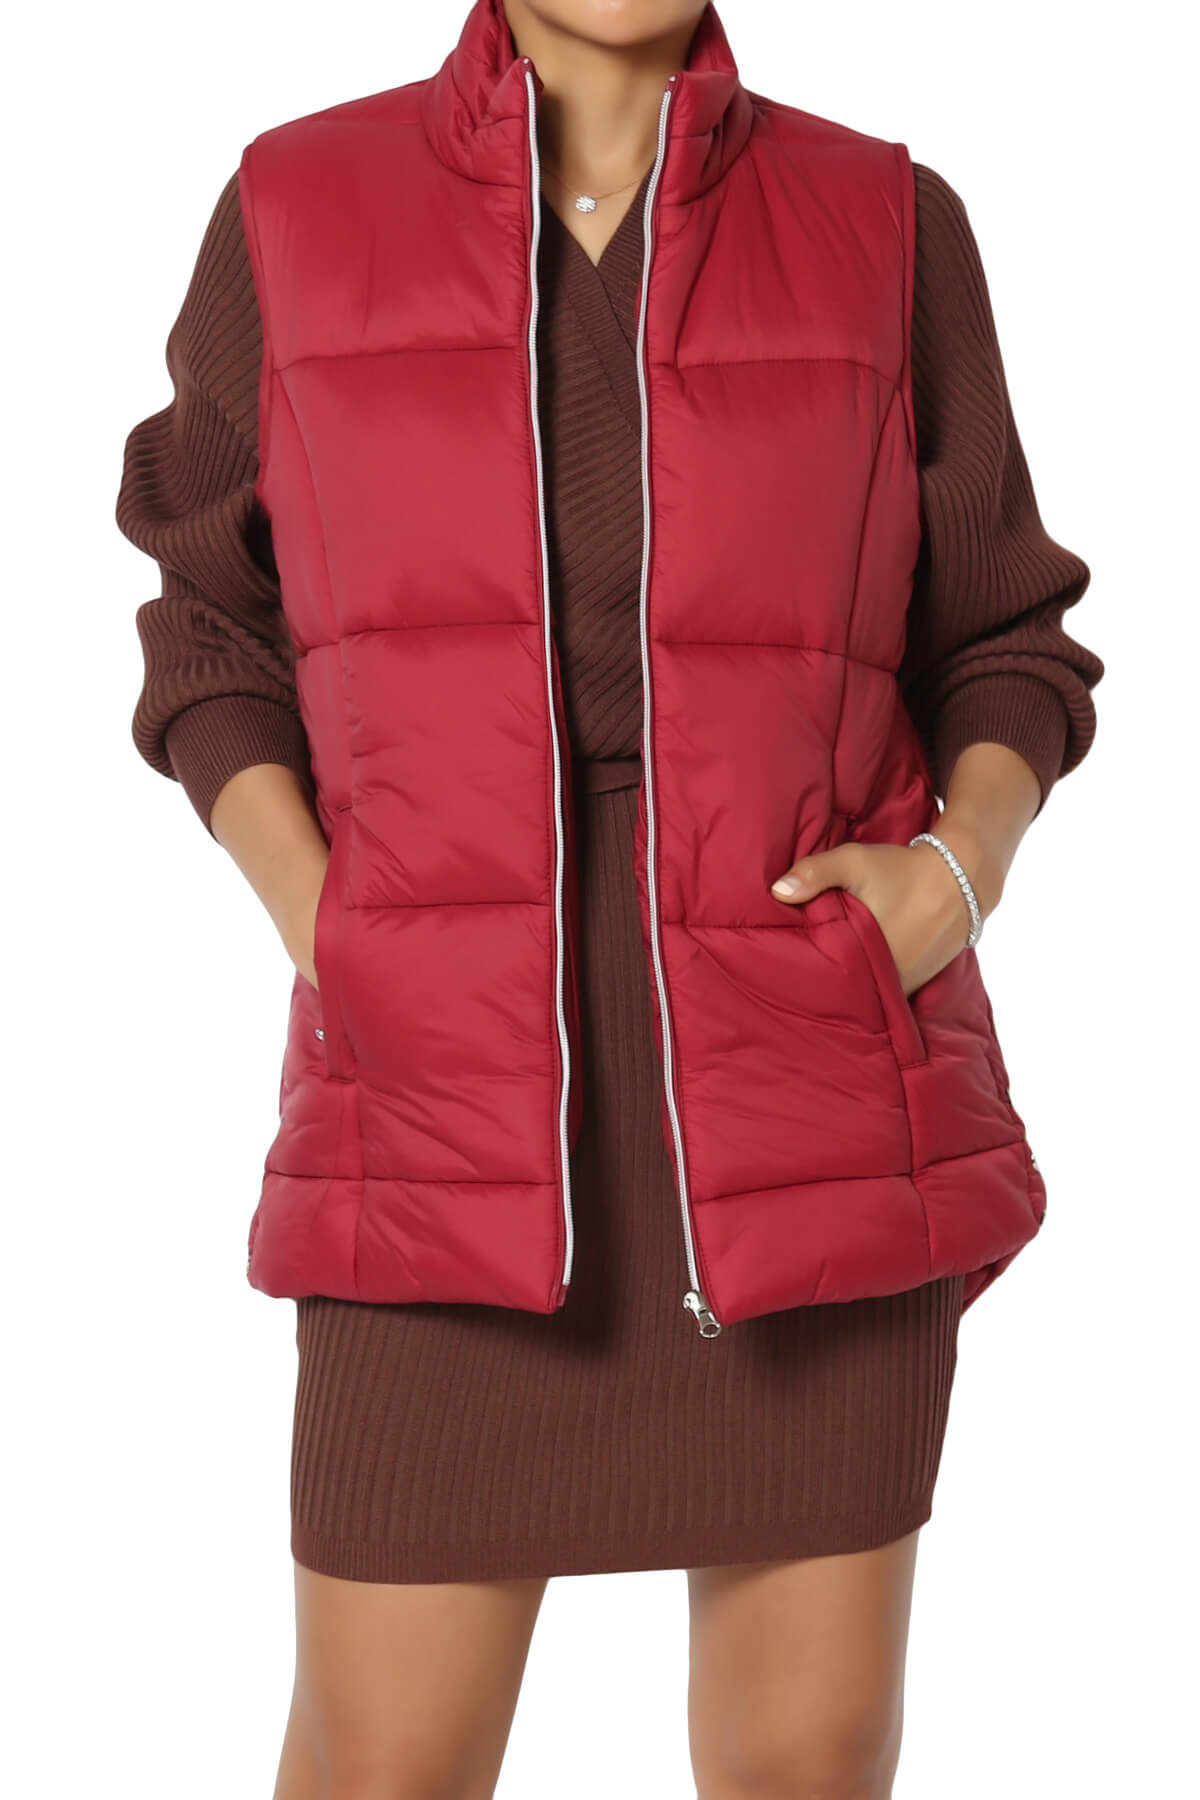 TheMogan Women's S~3X Basic Zip Up Puffer Padded Vest Sleeveless Quilted Gilet Jacket